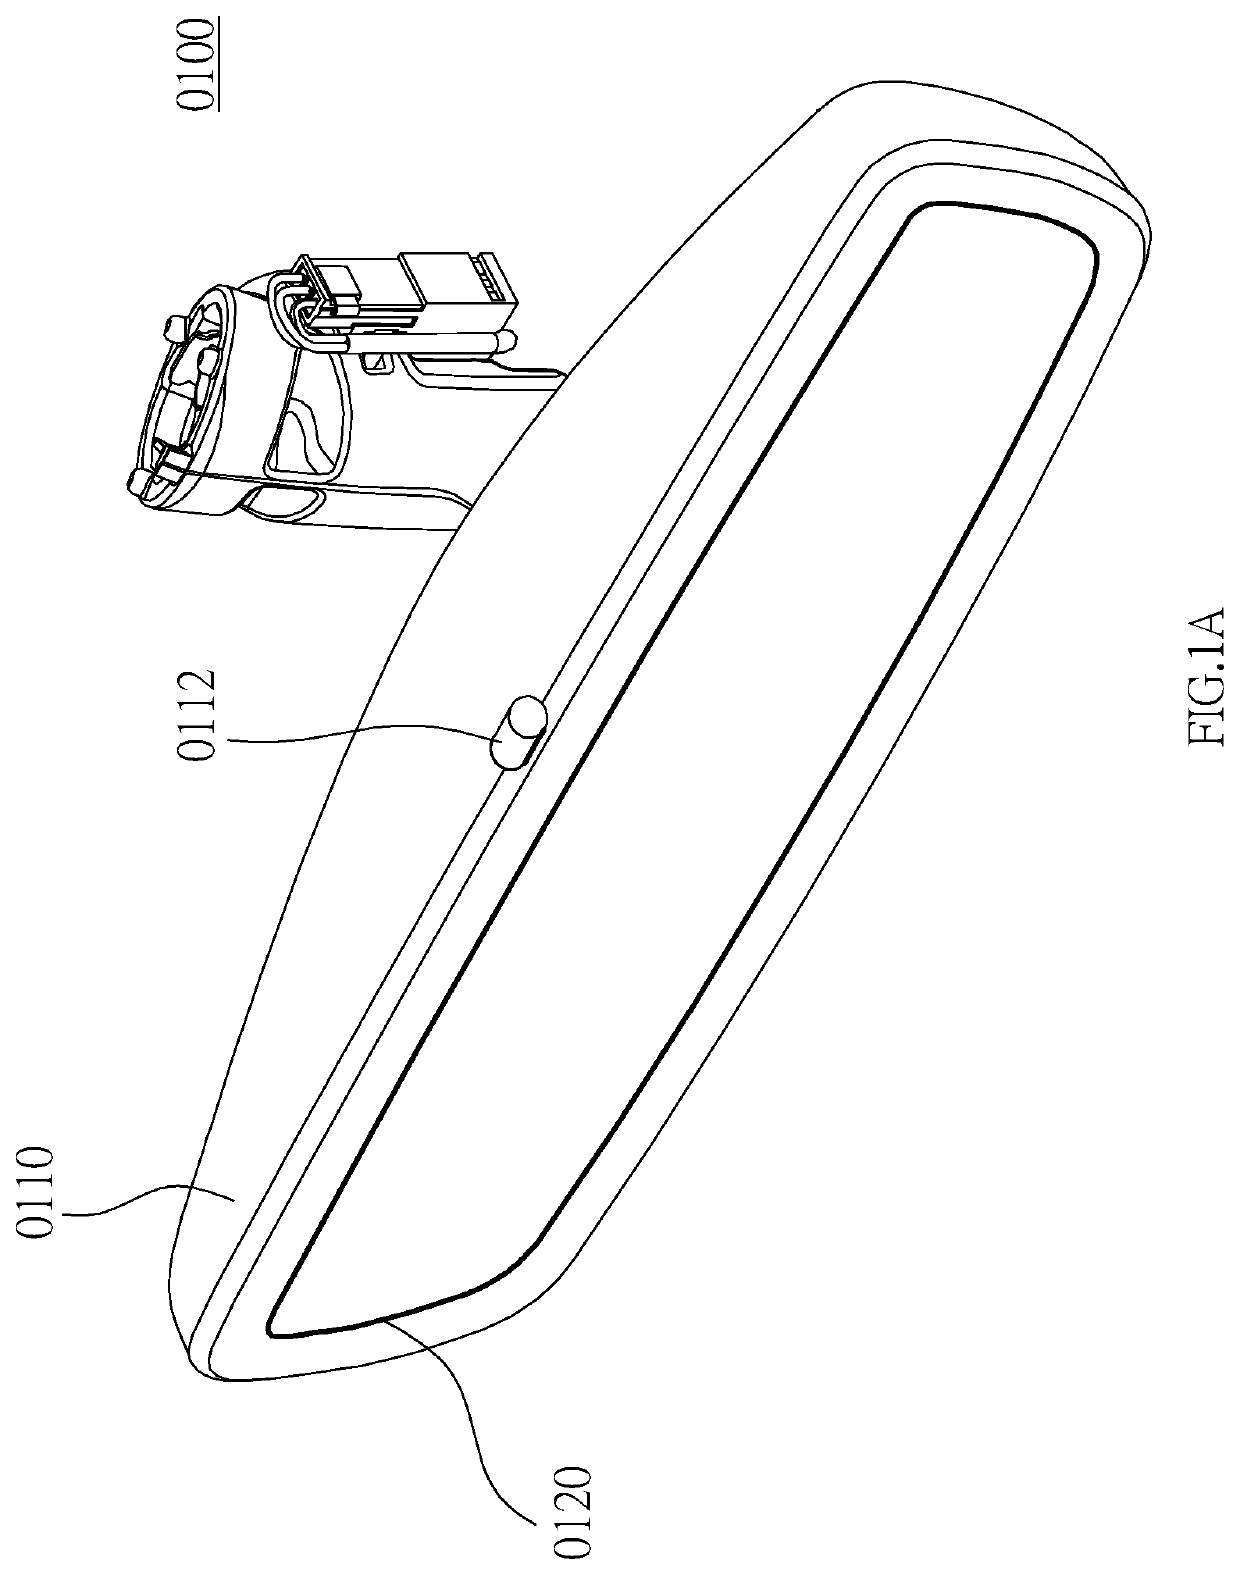 Movable carrier auxiliary system and vehicle electronic rear-view mirror